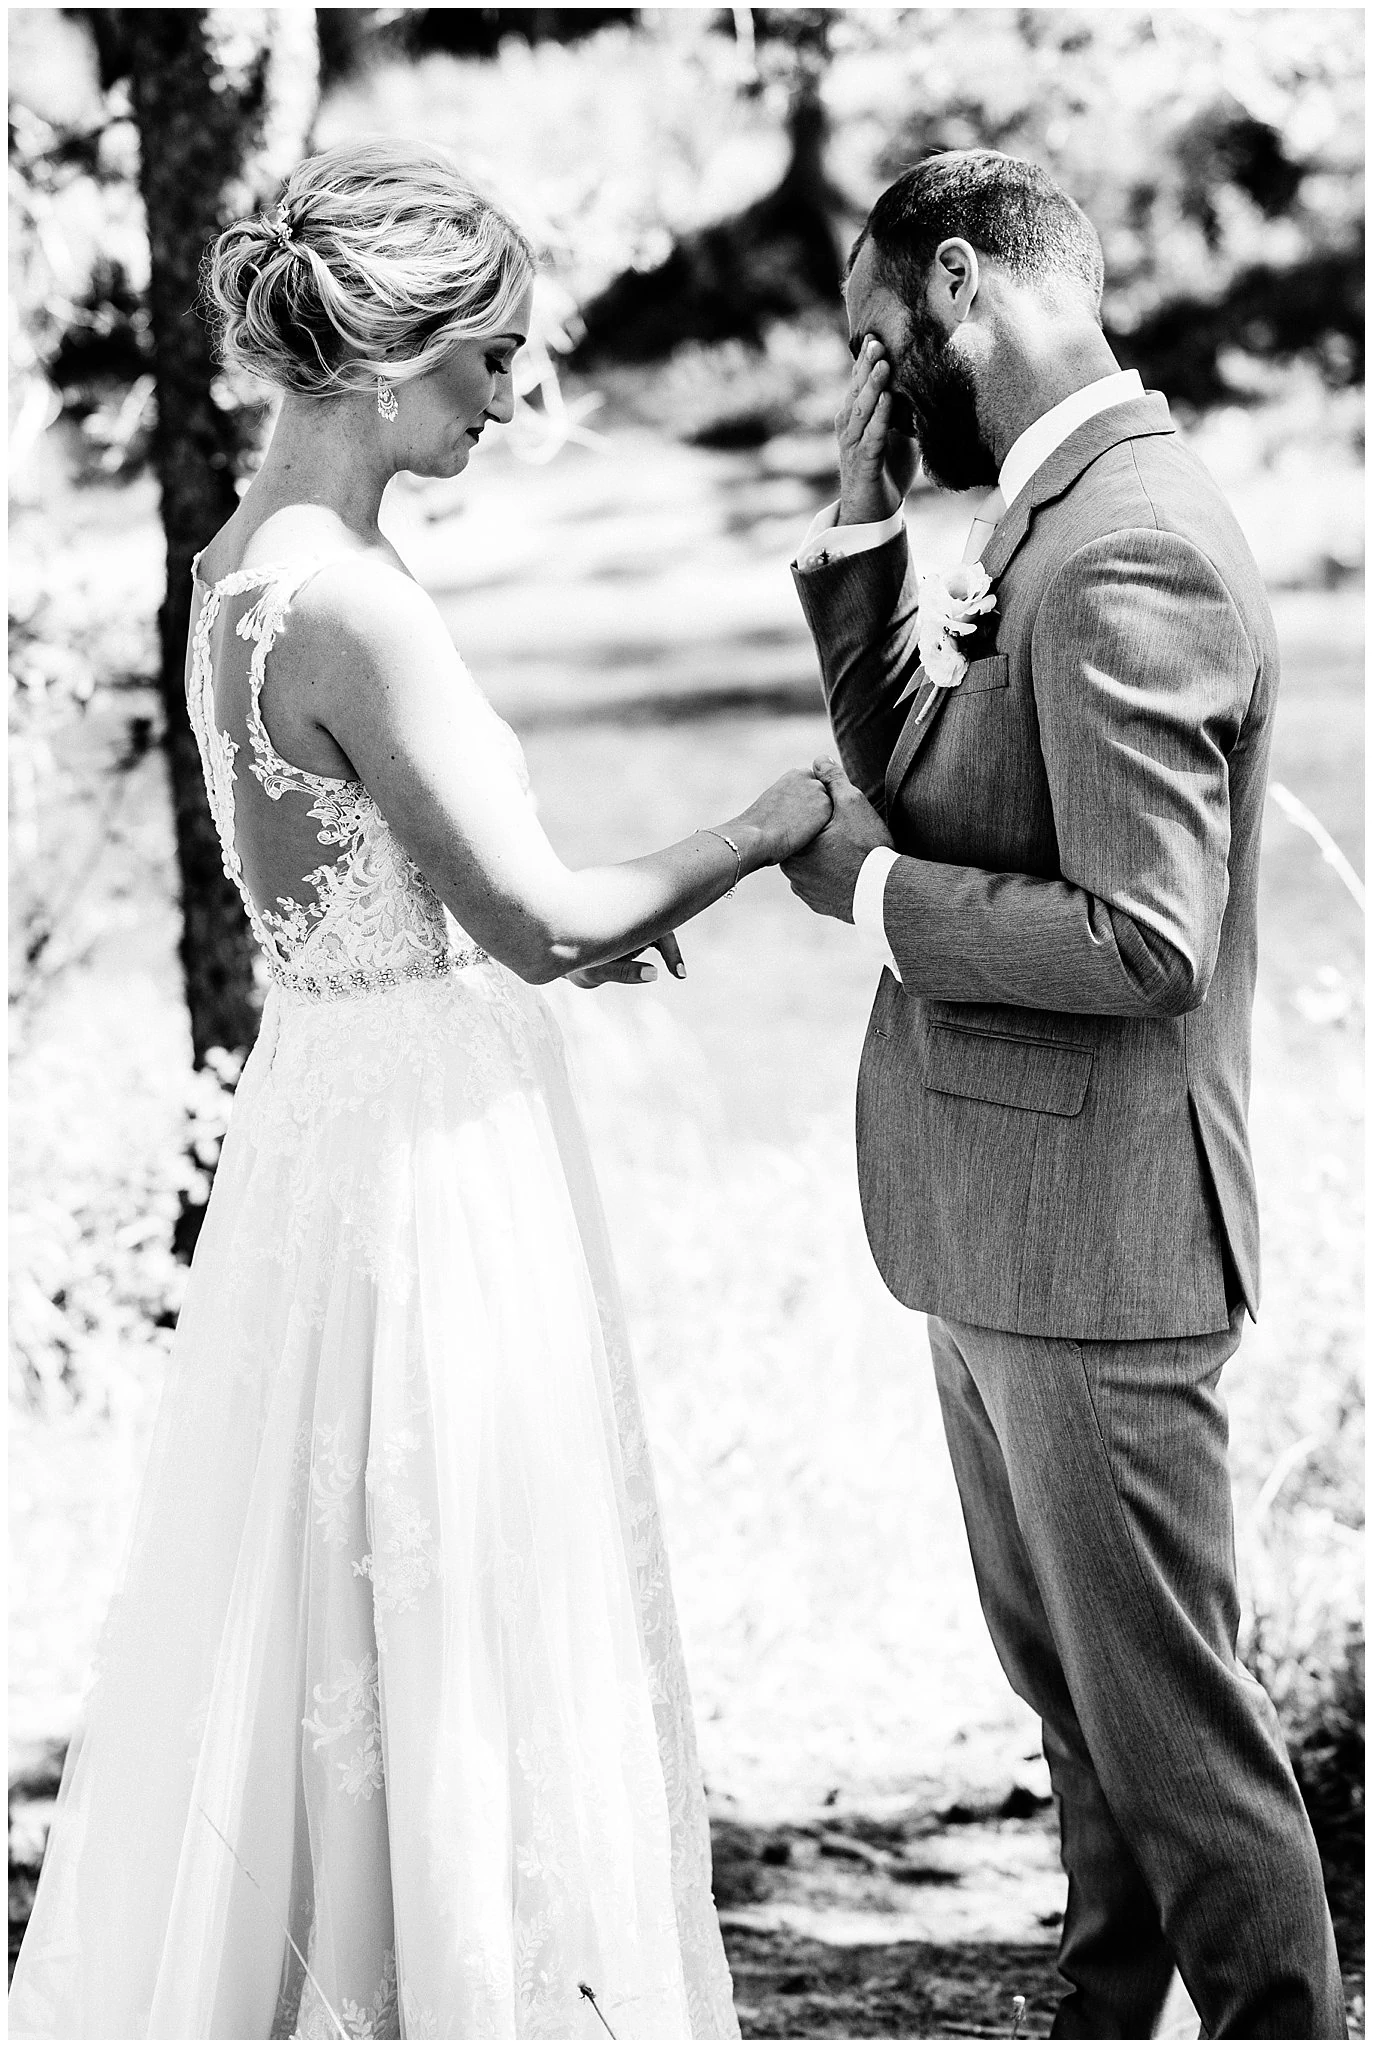 emotional first look by river at Elegant Piney River Ranch wedding by Piney River Ranch wedding photographer Jennie Crate, Photographer